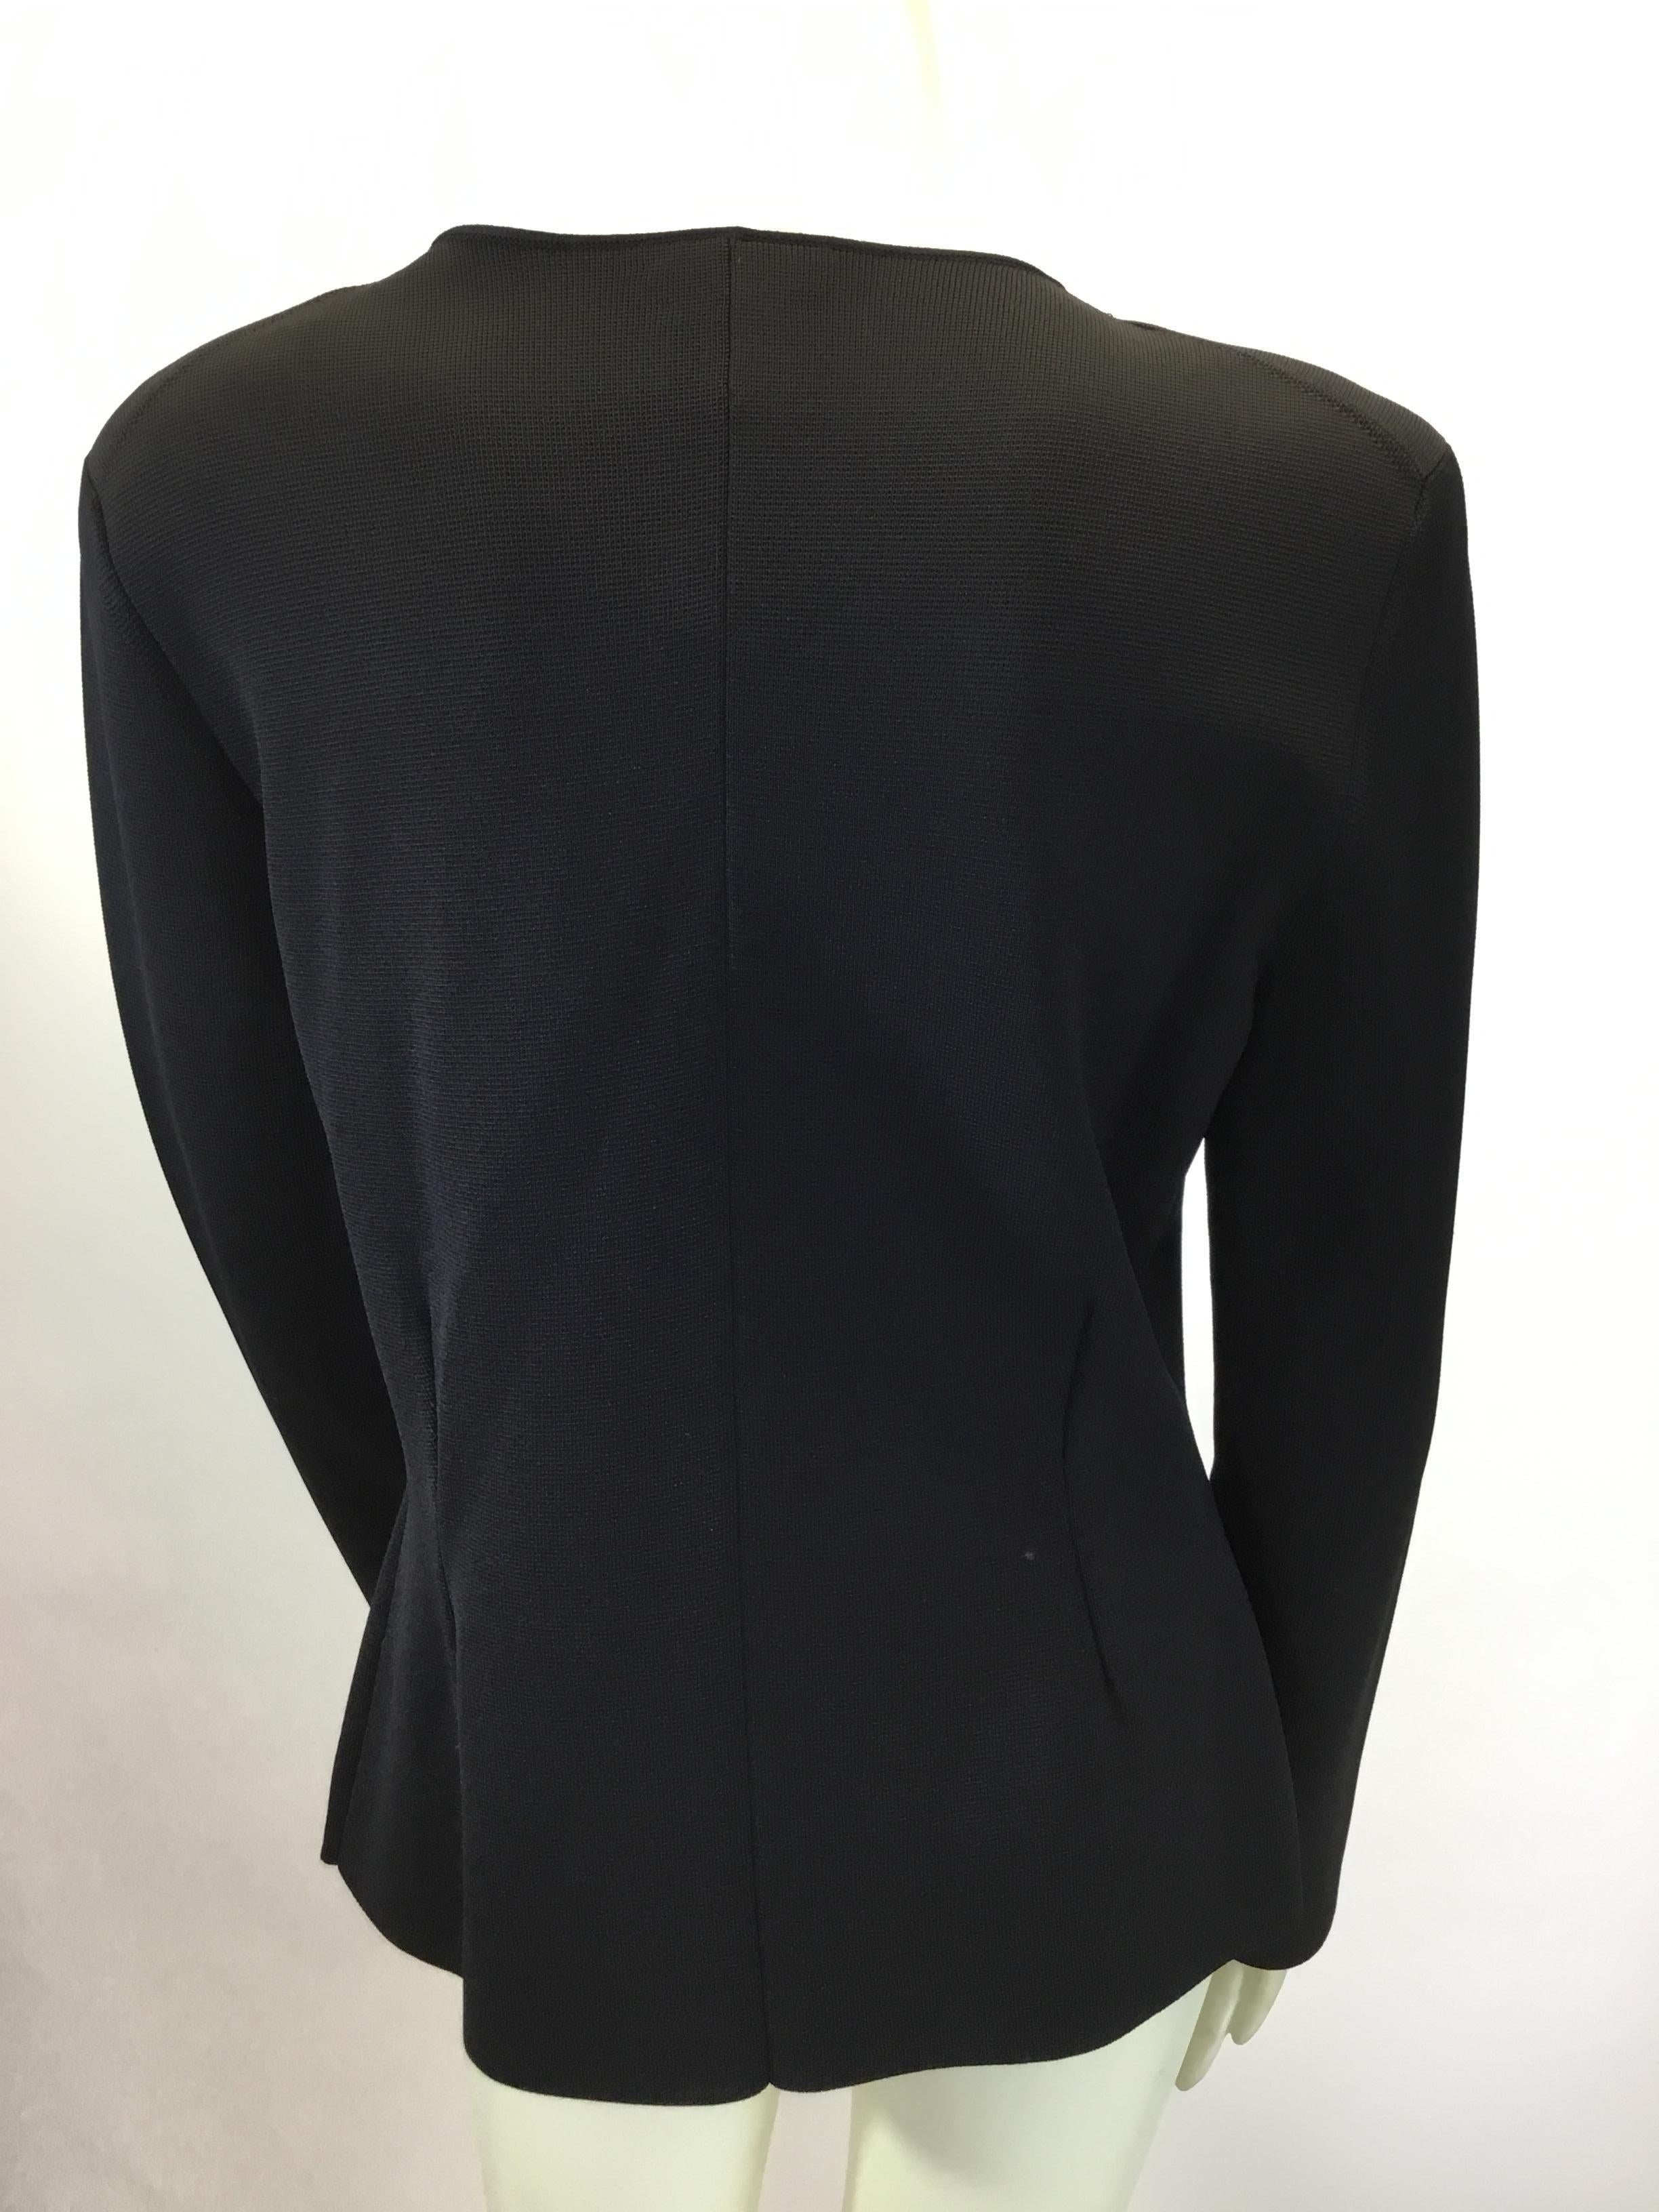 Tom Ford Black Knit Zippered Jacket  In Good Condition For Sale In Narberth, PA